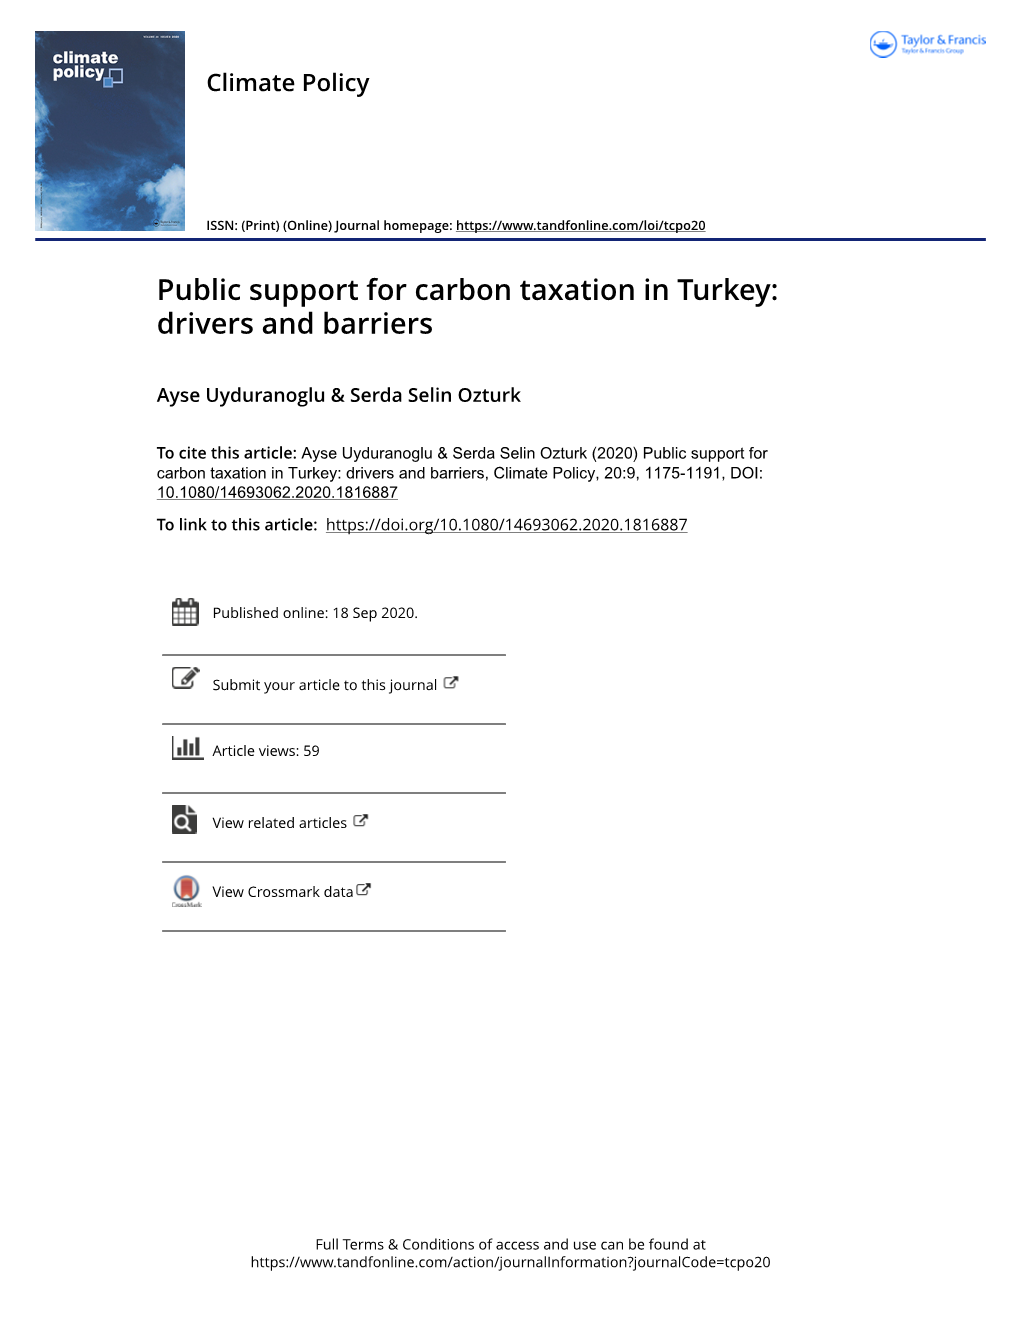 Public Support for Carbon Taxation in Turkey: Drivers and Barriers